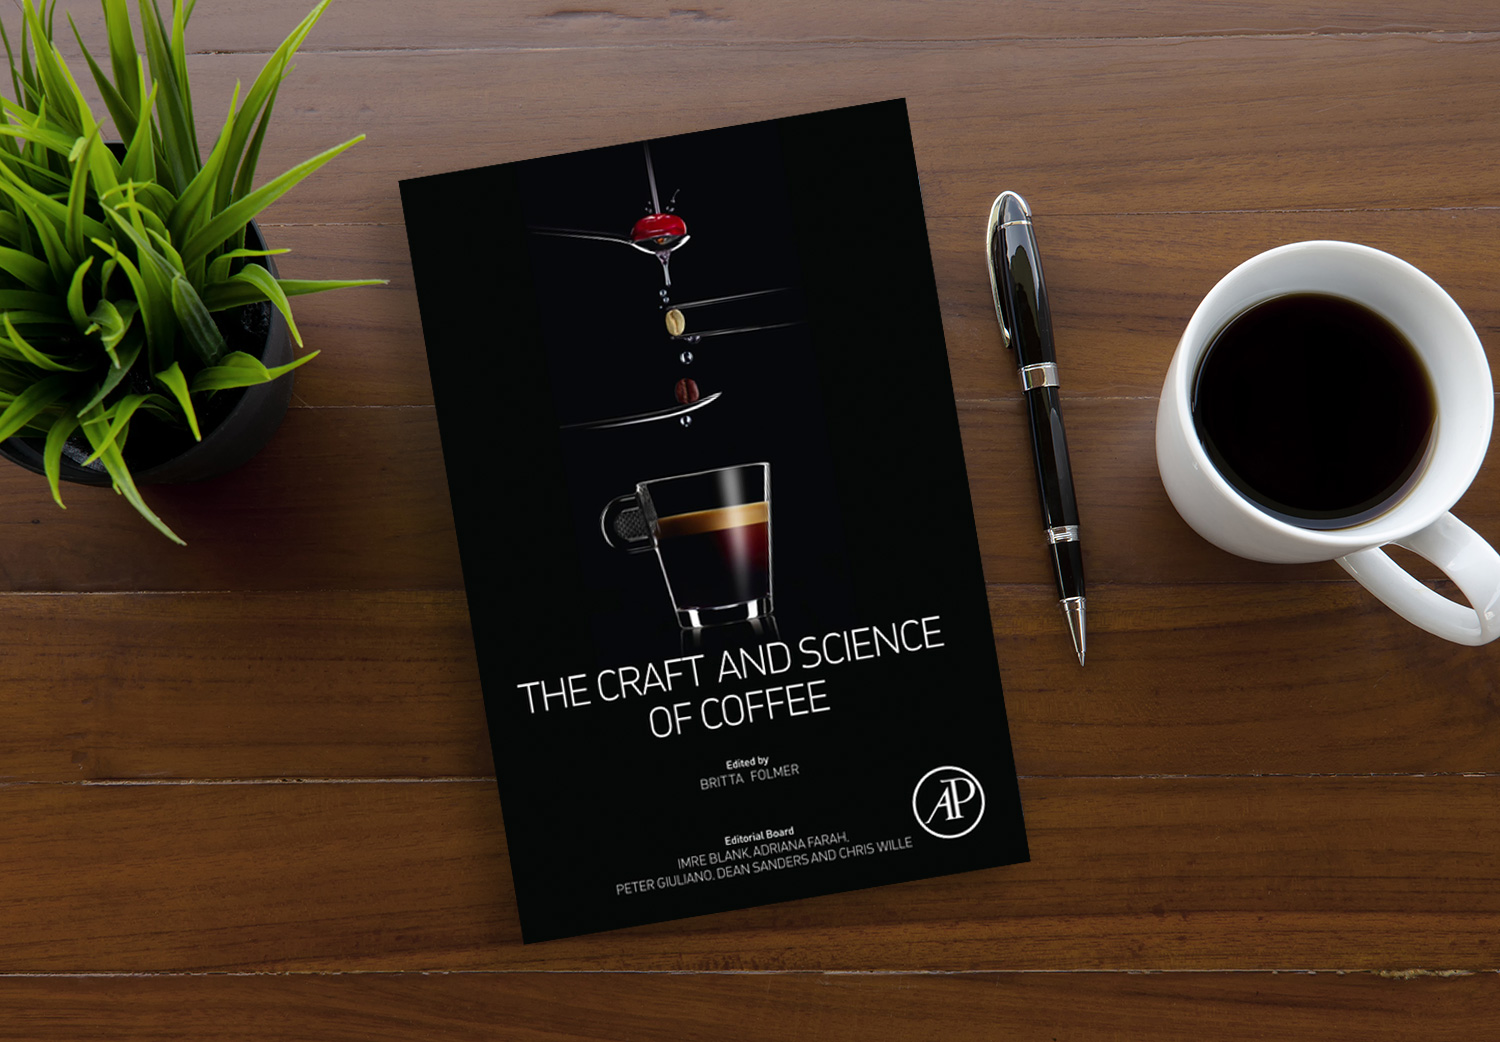 The Craft and Science of Coffee by Britta Folmer on a wooden table.